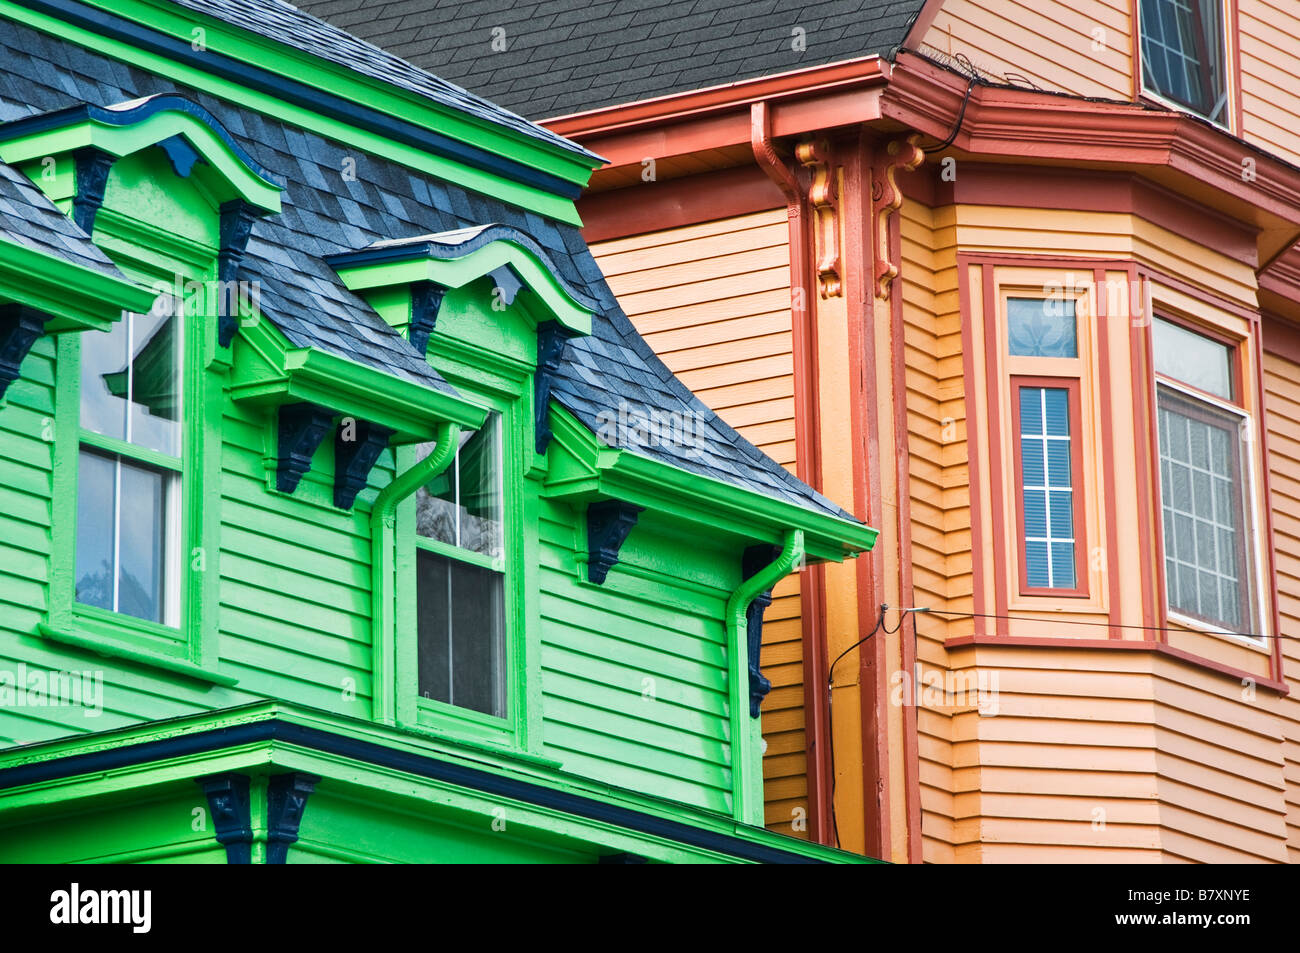 Brightly painted houses in Lunenburg Nova Scotia Canada Stock Photo